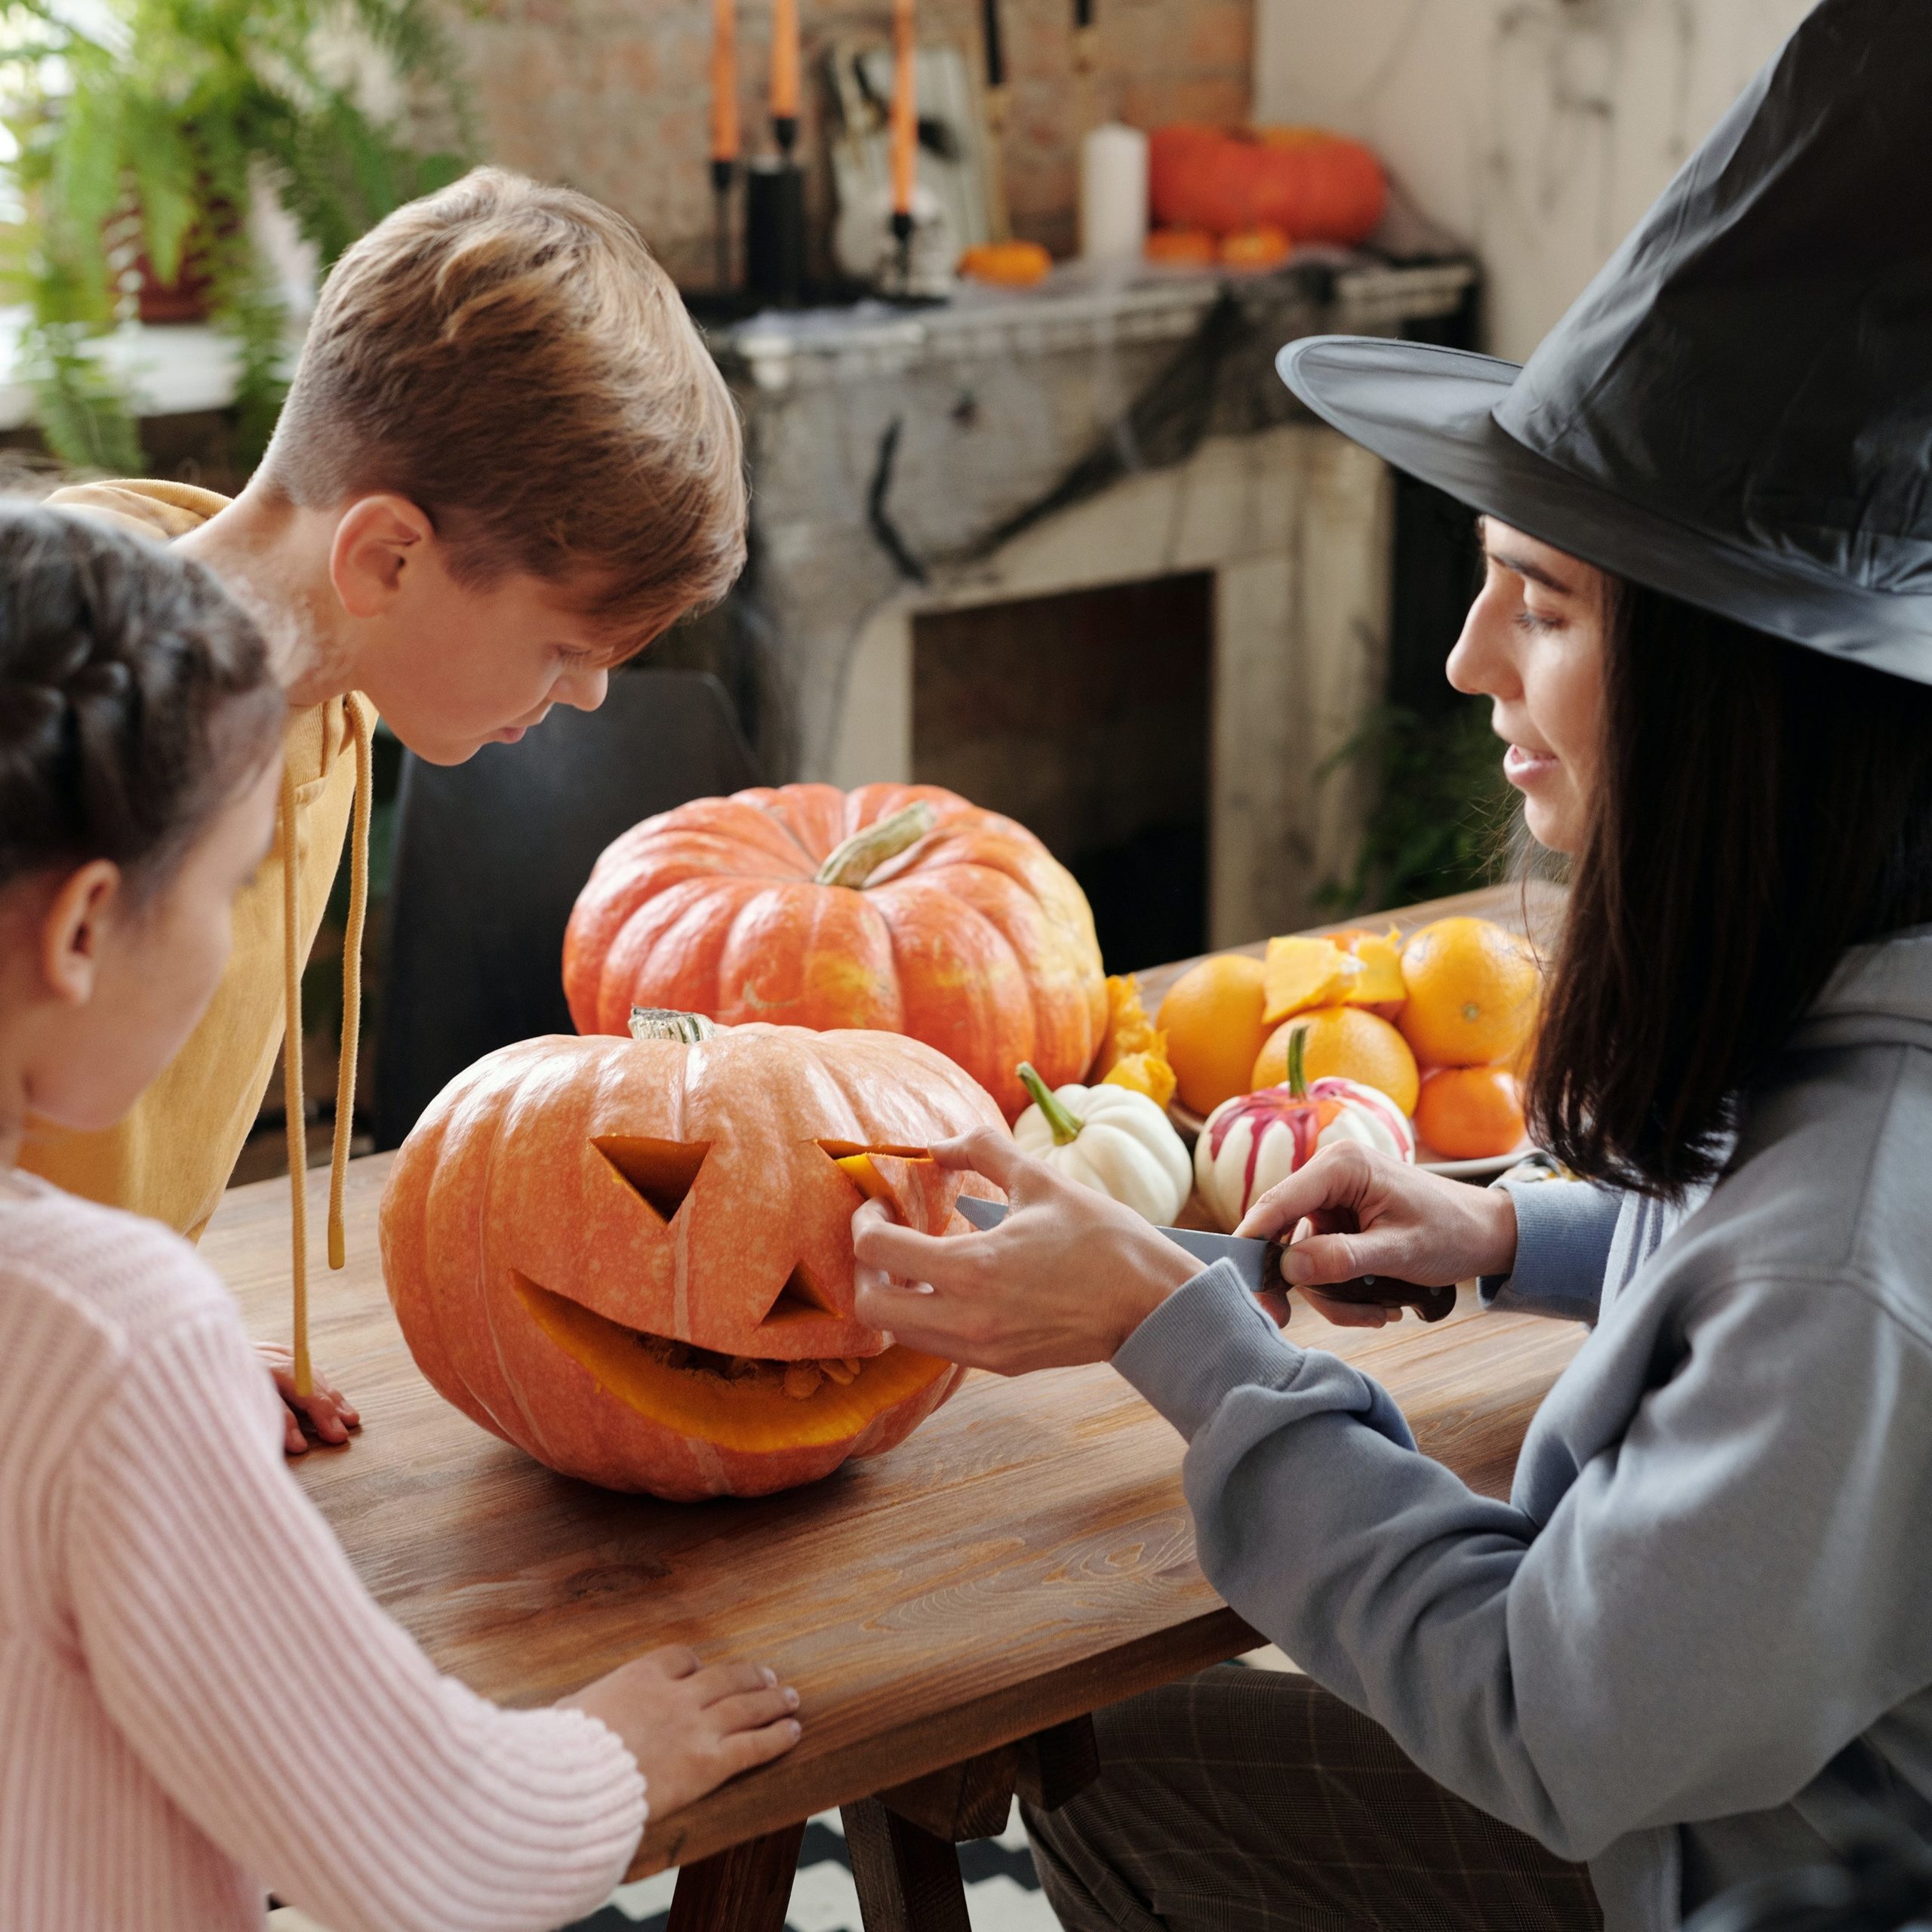 Carving pumkins is a great activity to do with kids